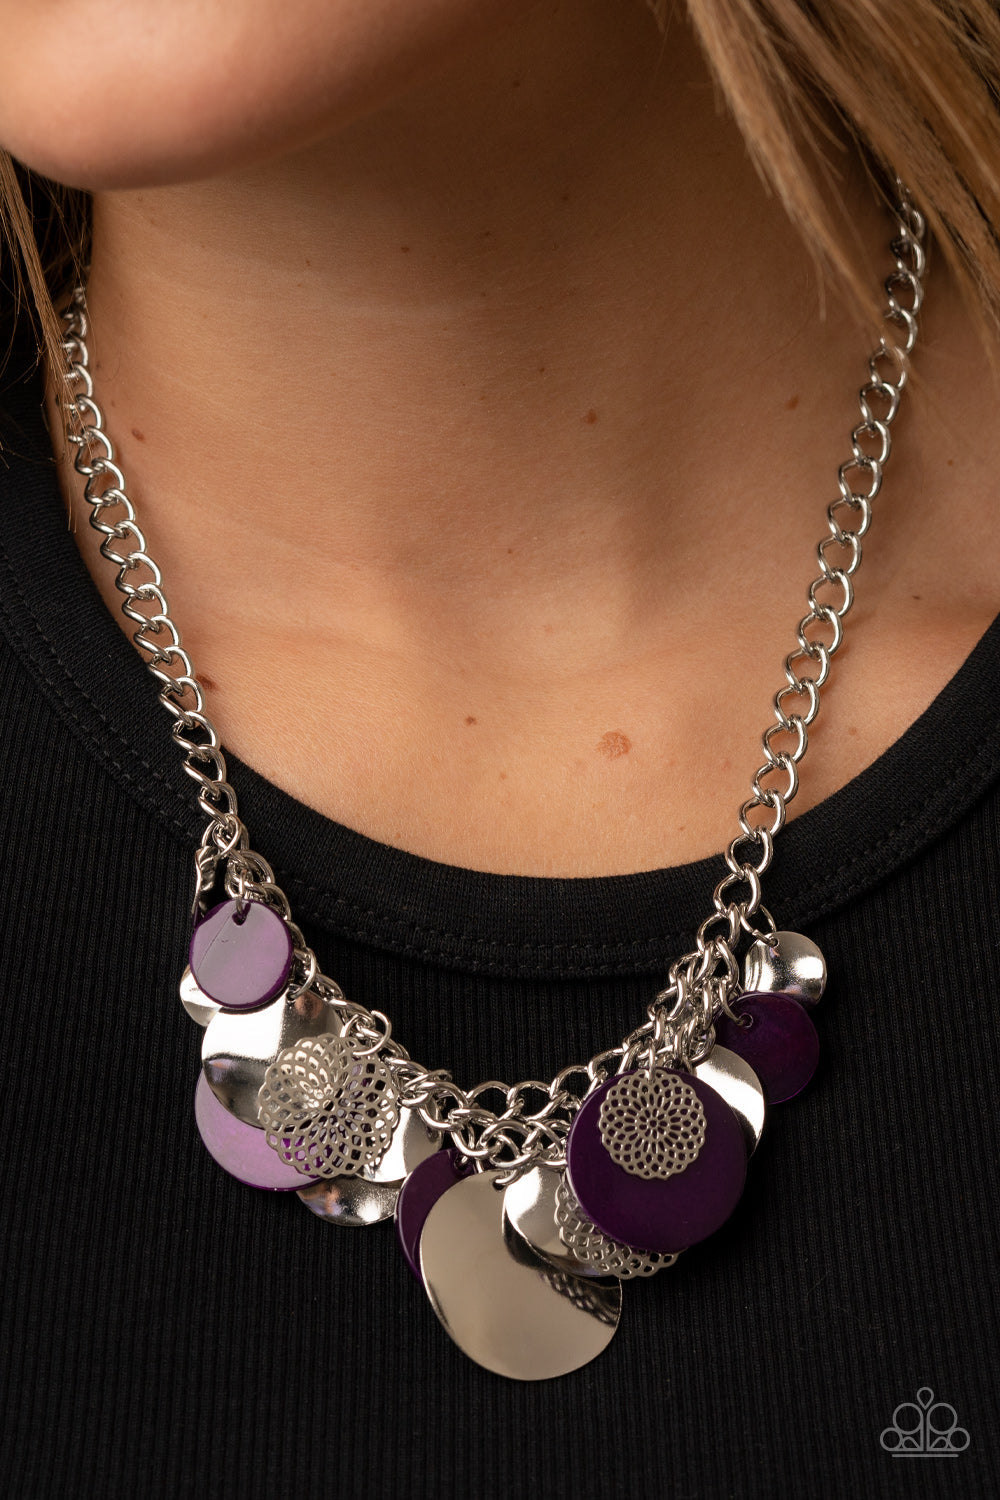 Oceanic Opera - Purple Plum and Silver Necklace - Paparazzi Accessories - A summery collection of bent silver discs, plum shell-like discs, and silver mandala-like accents cascades from a pair of layered silver chains, resulting in a bubbly and boisterous fringe below the collar. Features an adjustable clasp closure. Sold as one individual necklace.